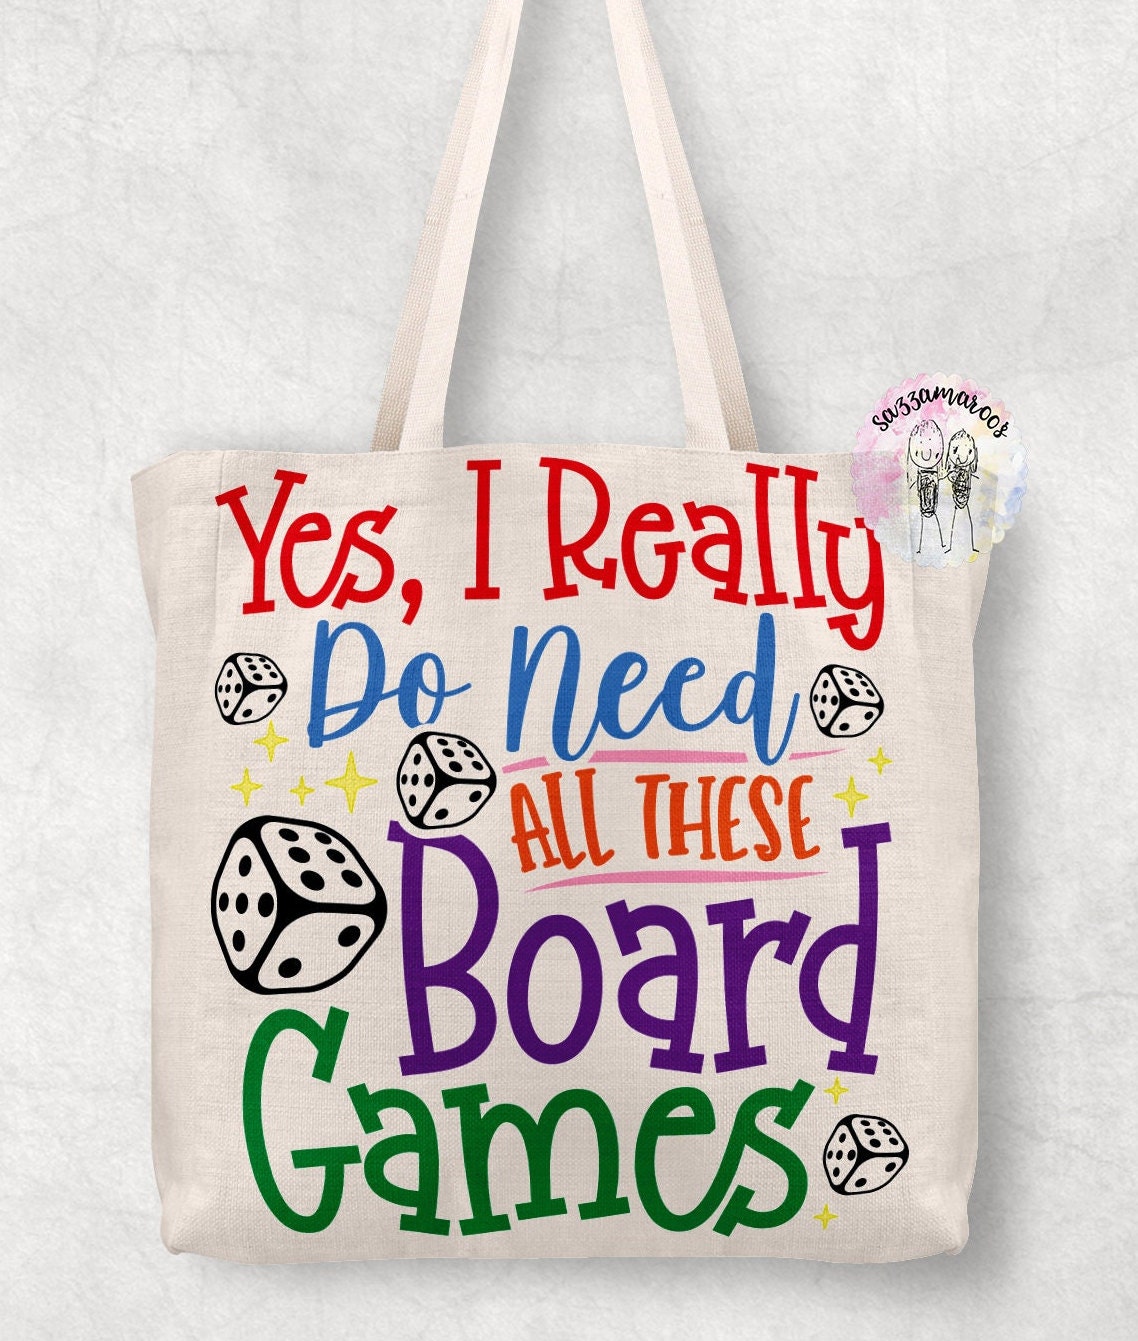 A list of board game bags  rboardgames